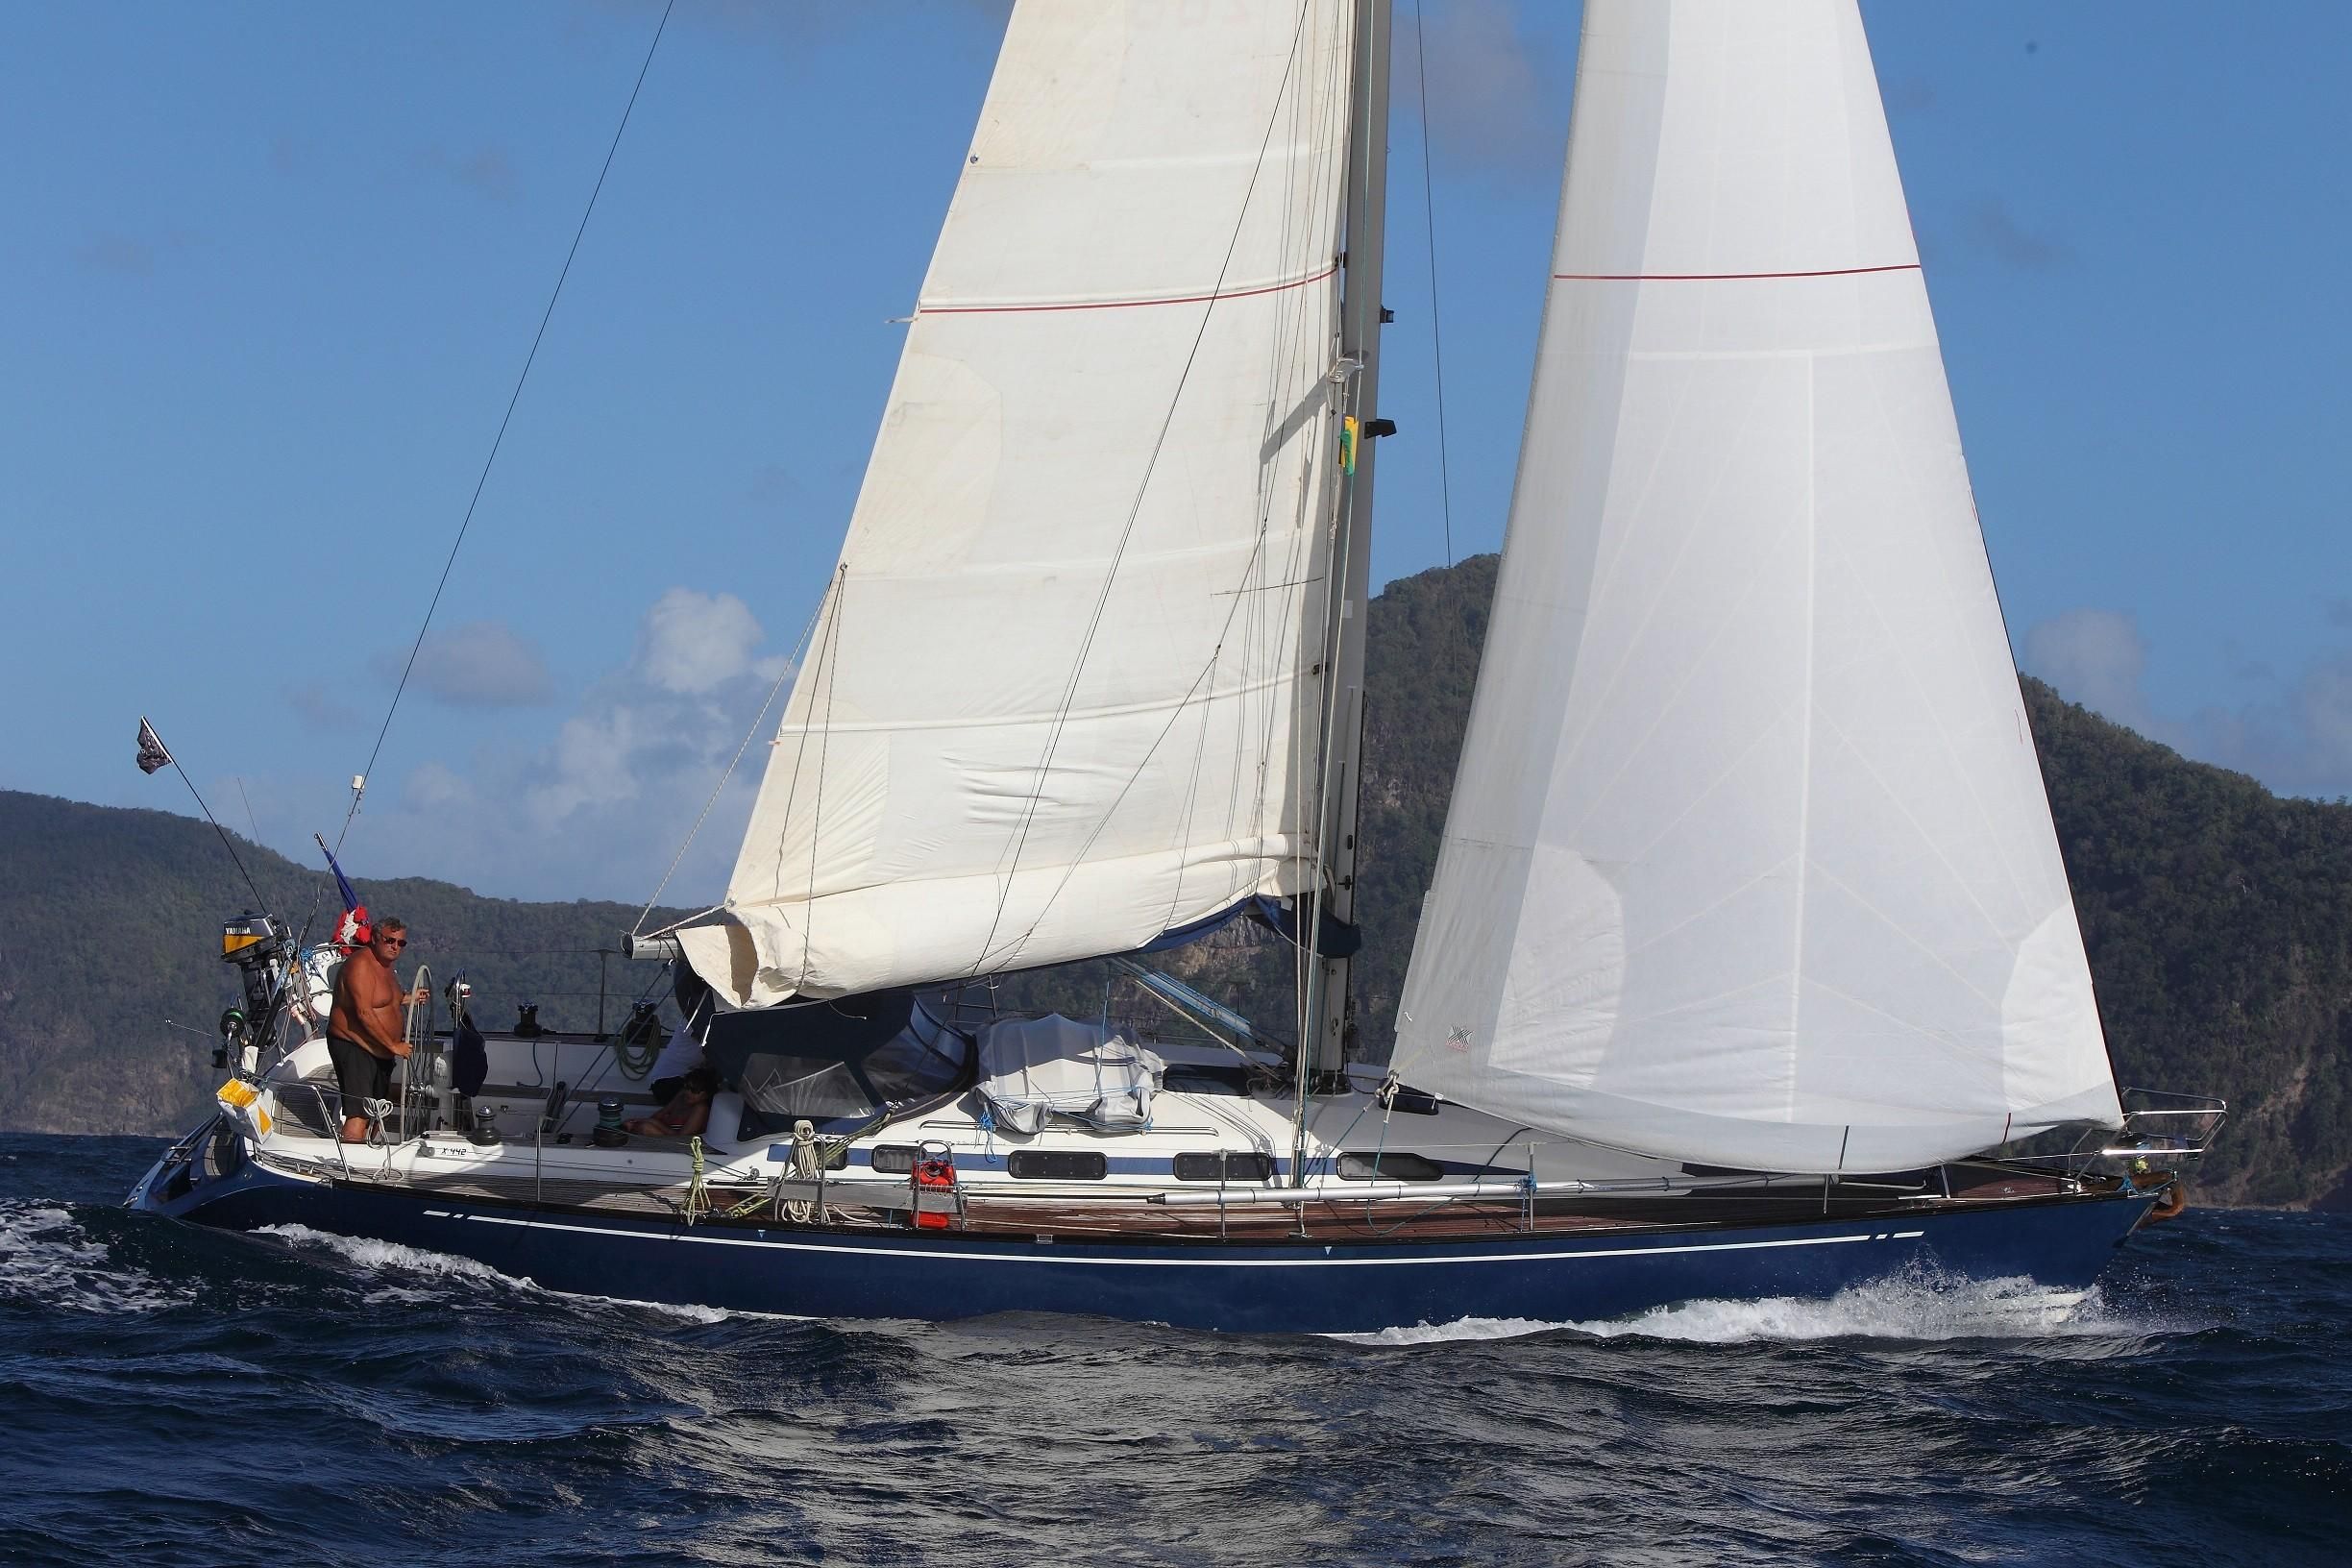 x yachts 442 for sale